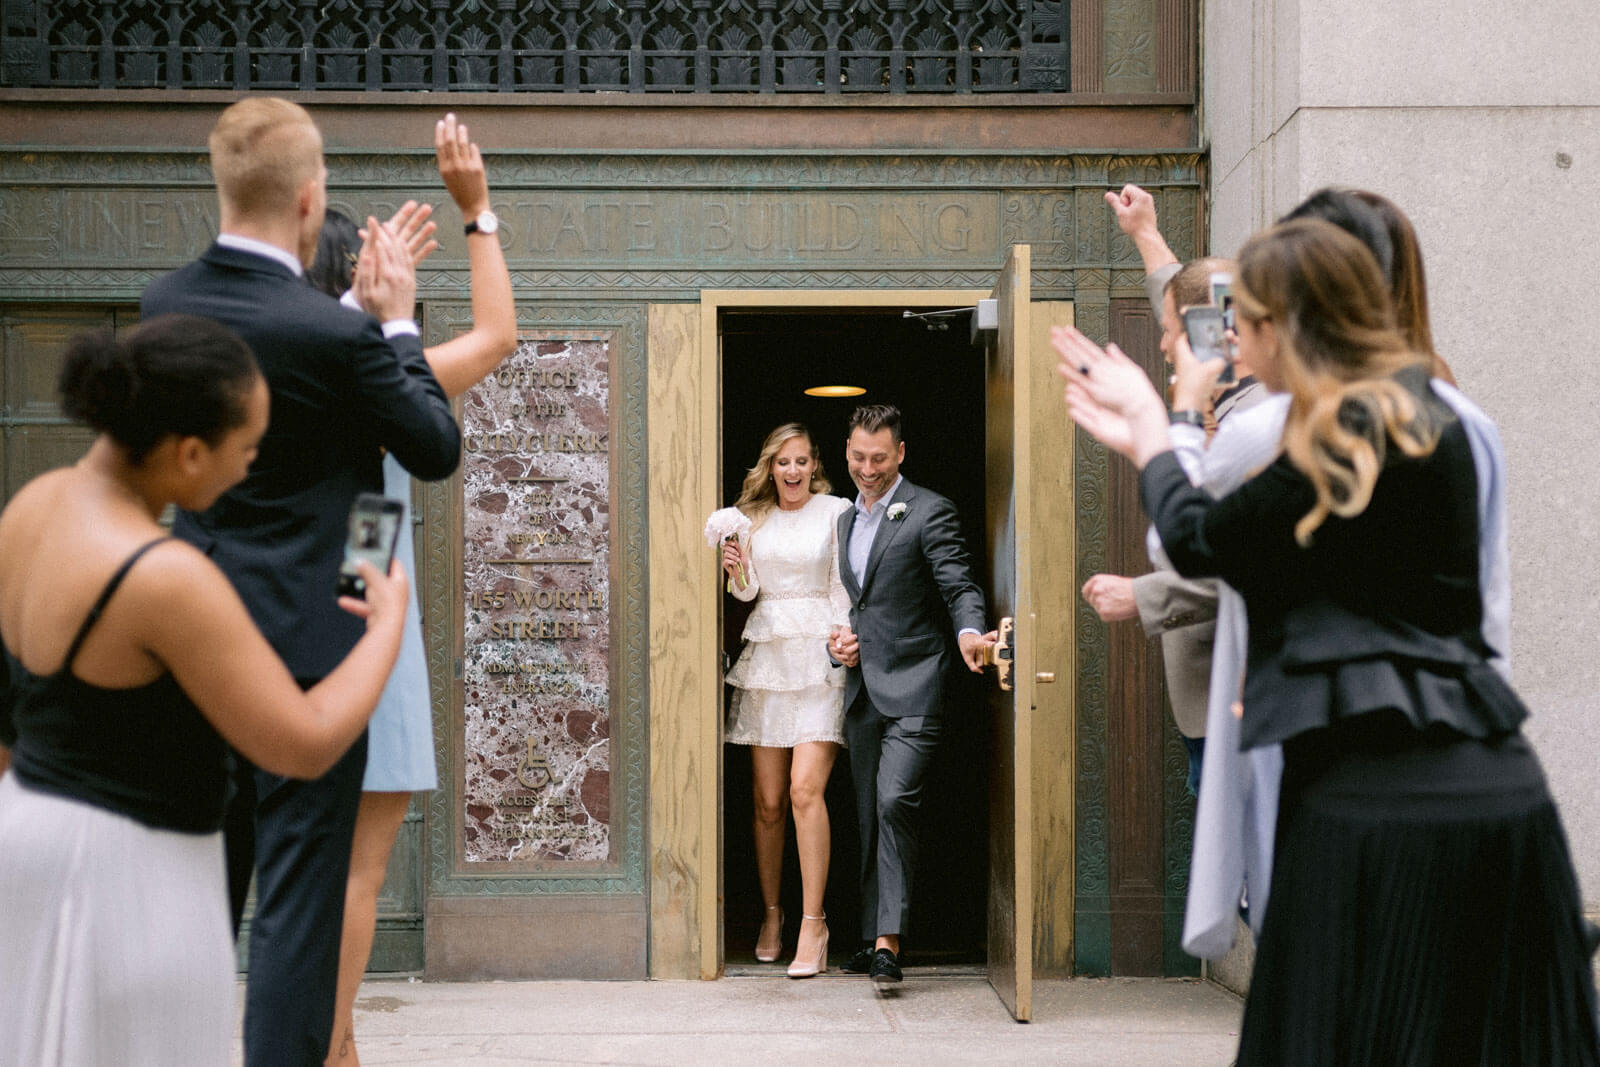 Newlyweds coming out of the New York State Building as a few guests cheer, clap, and take pictures outside.